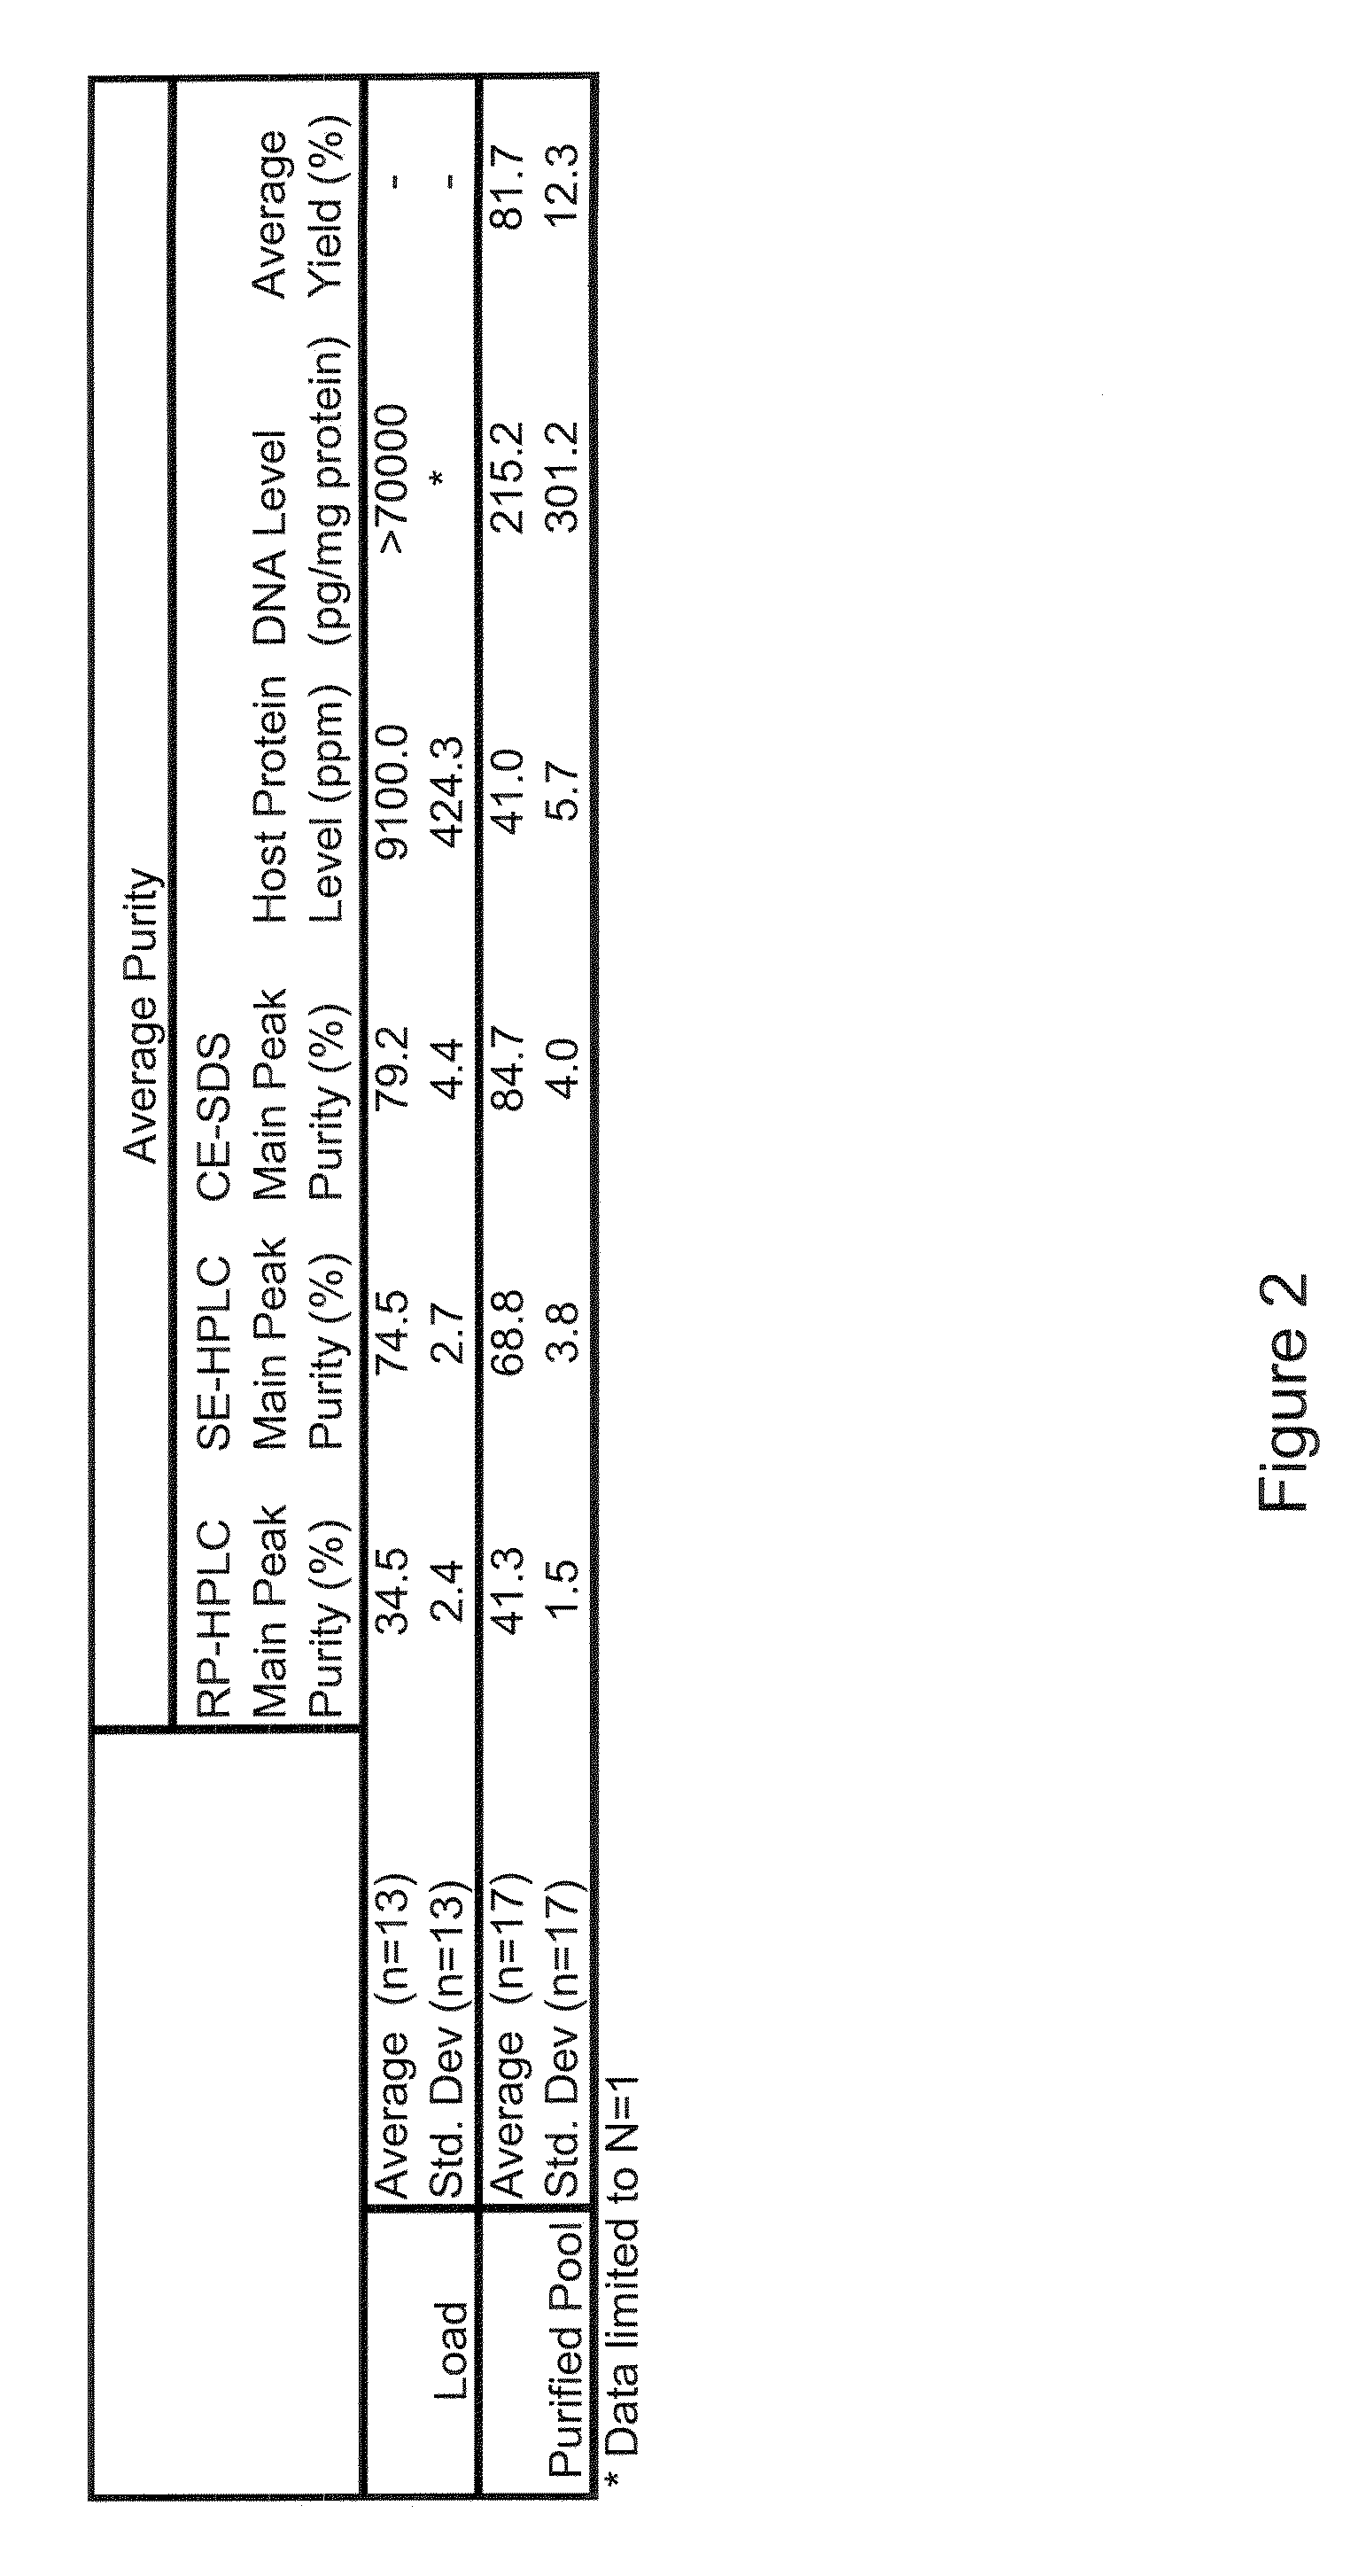 Capture purification processes for proteins expressed in a non-mammalian system